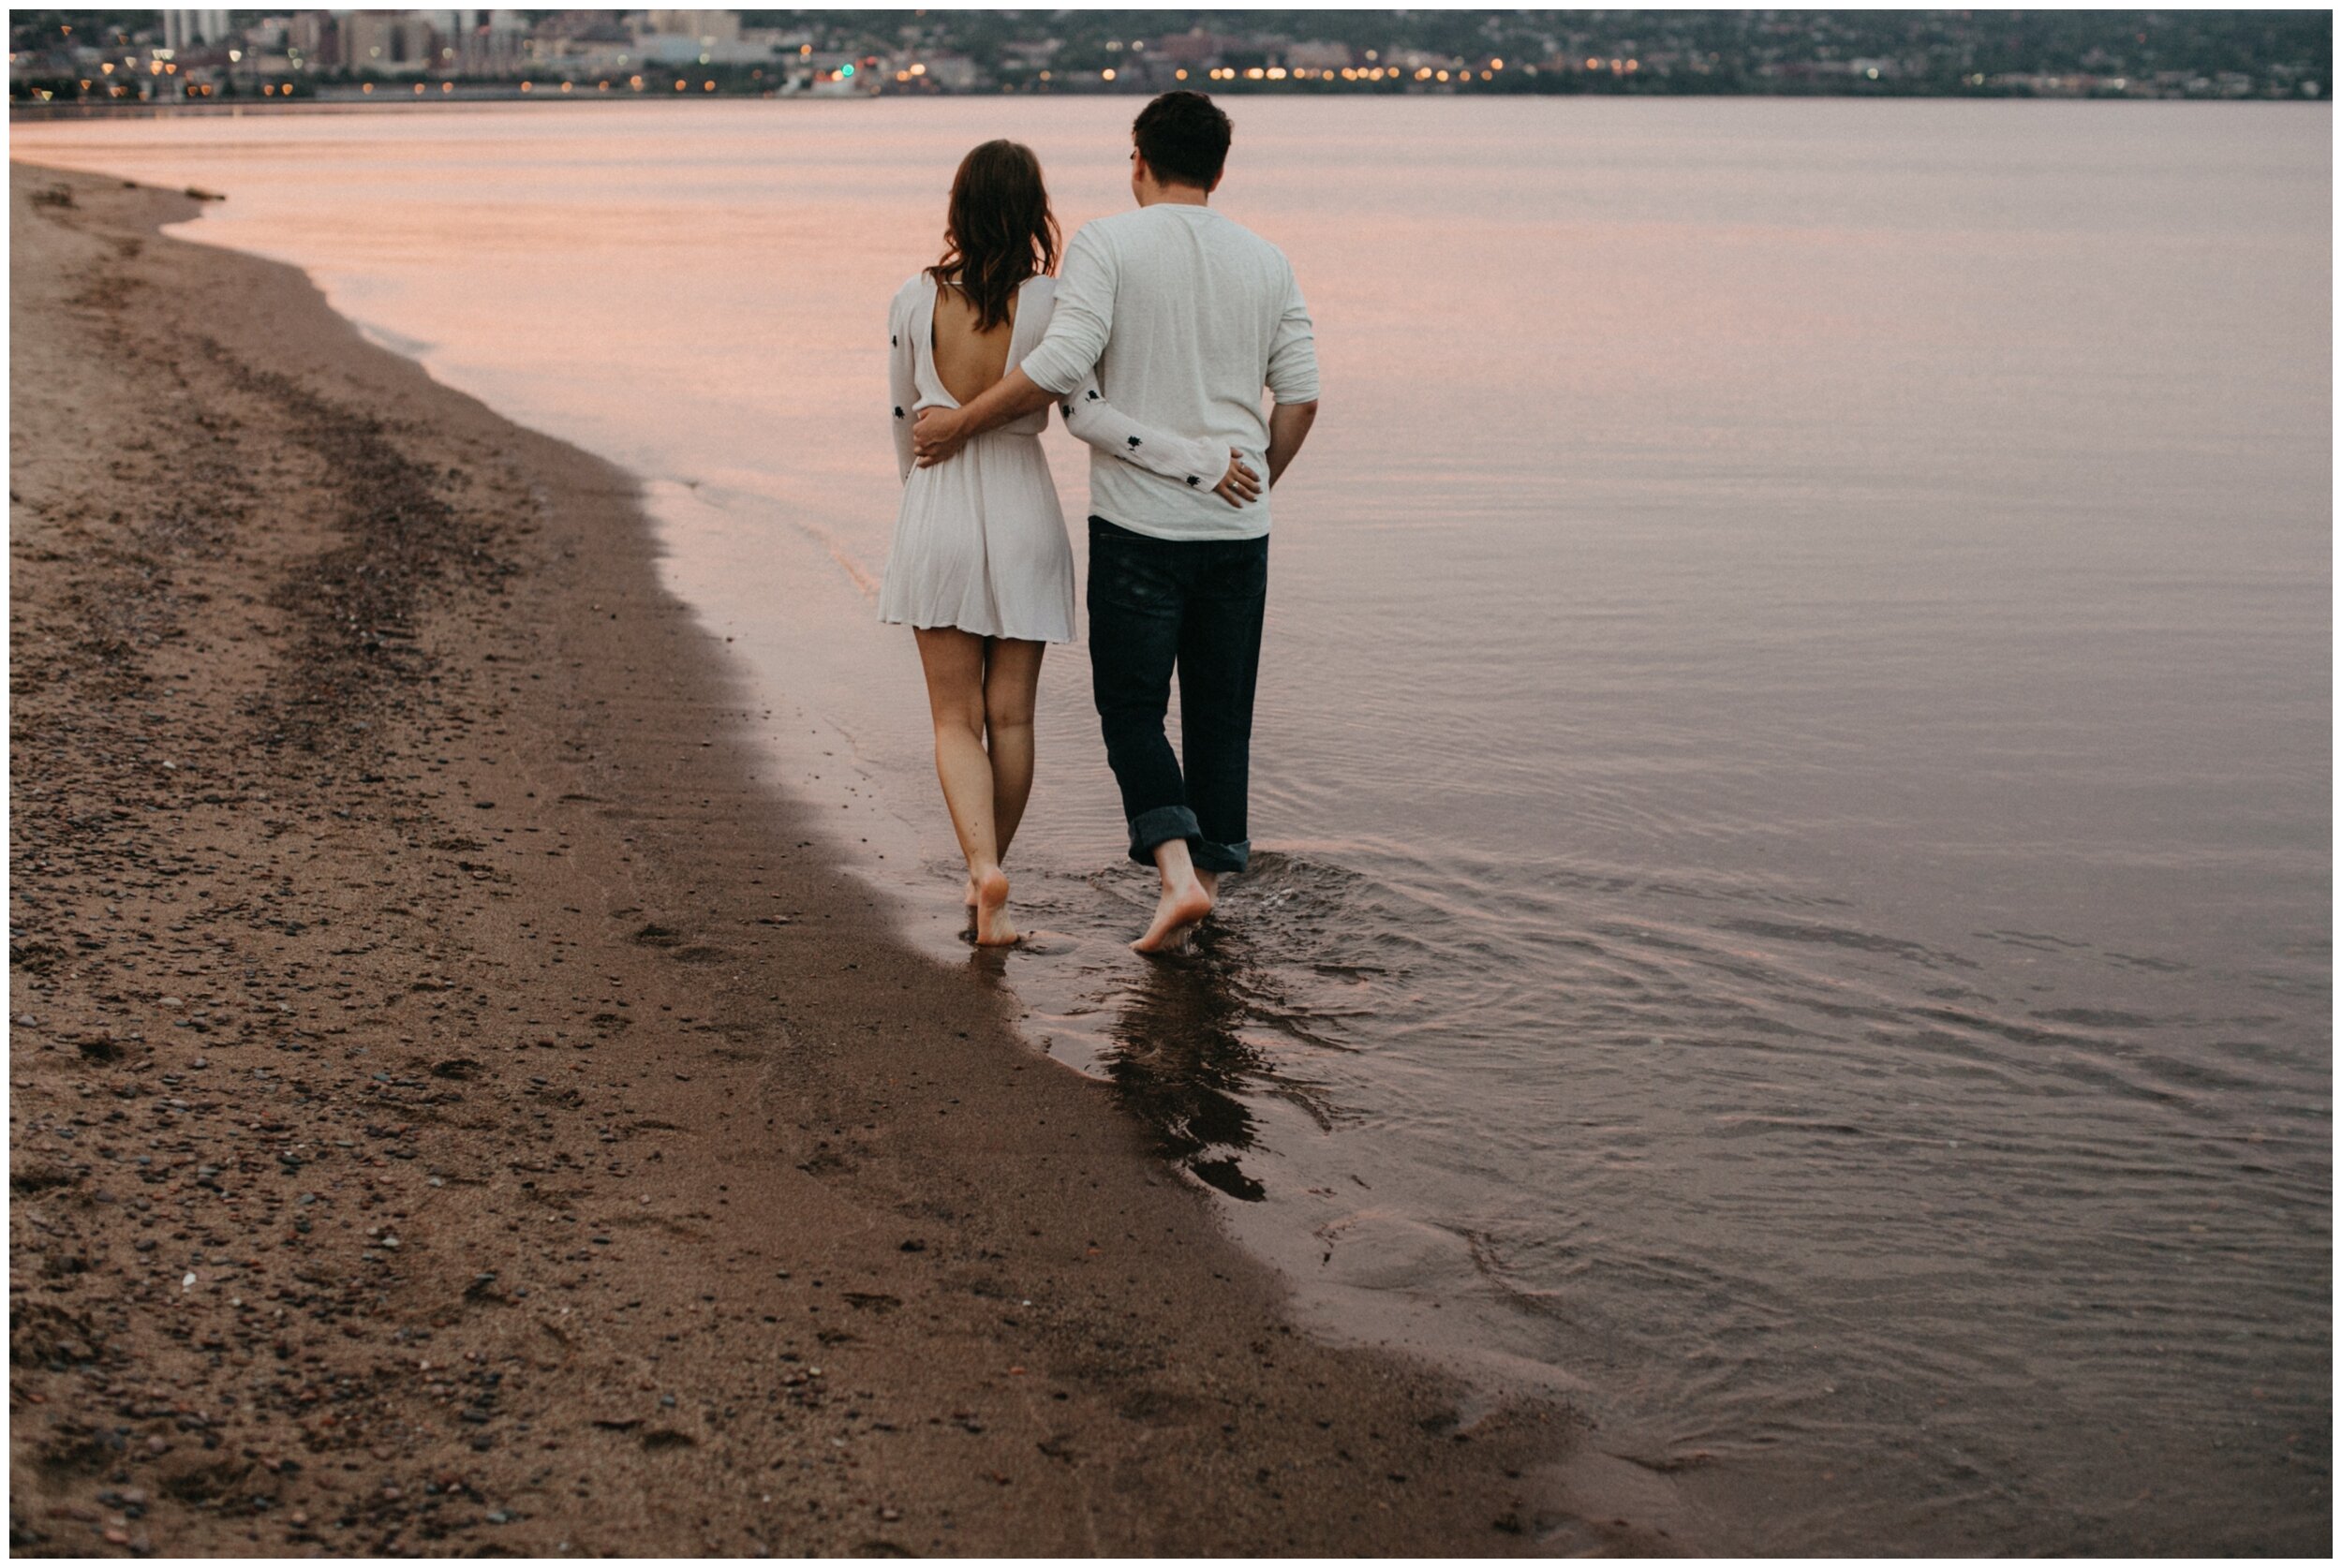 North shore sunset engagement session at Park Point Beach in Duluth Minnesota